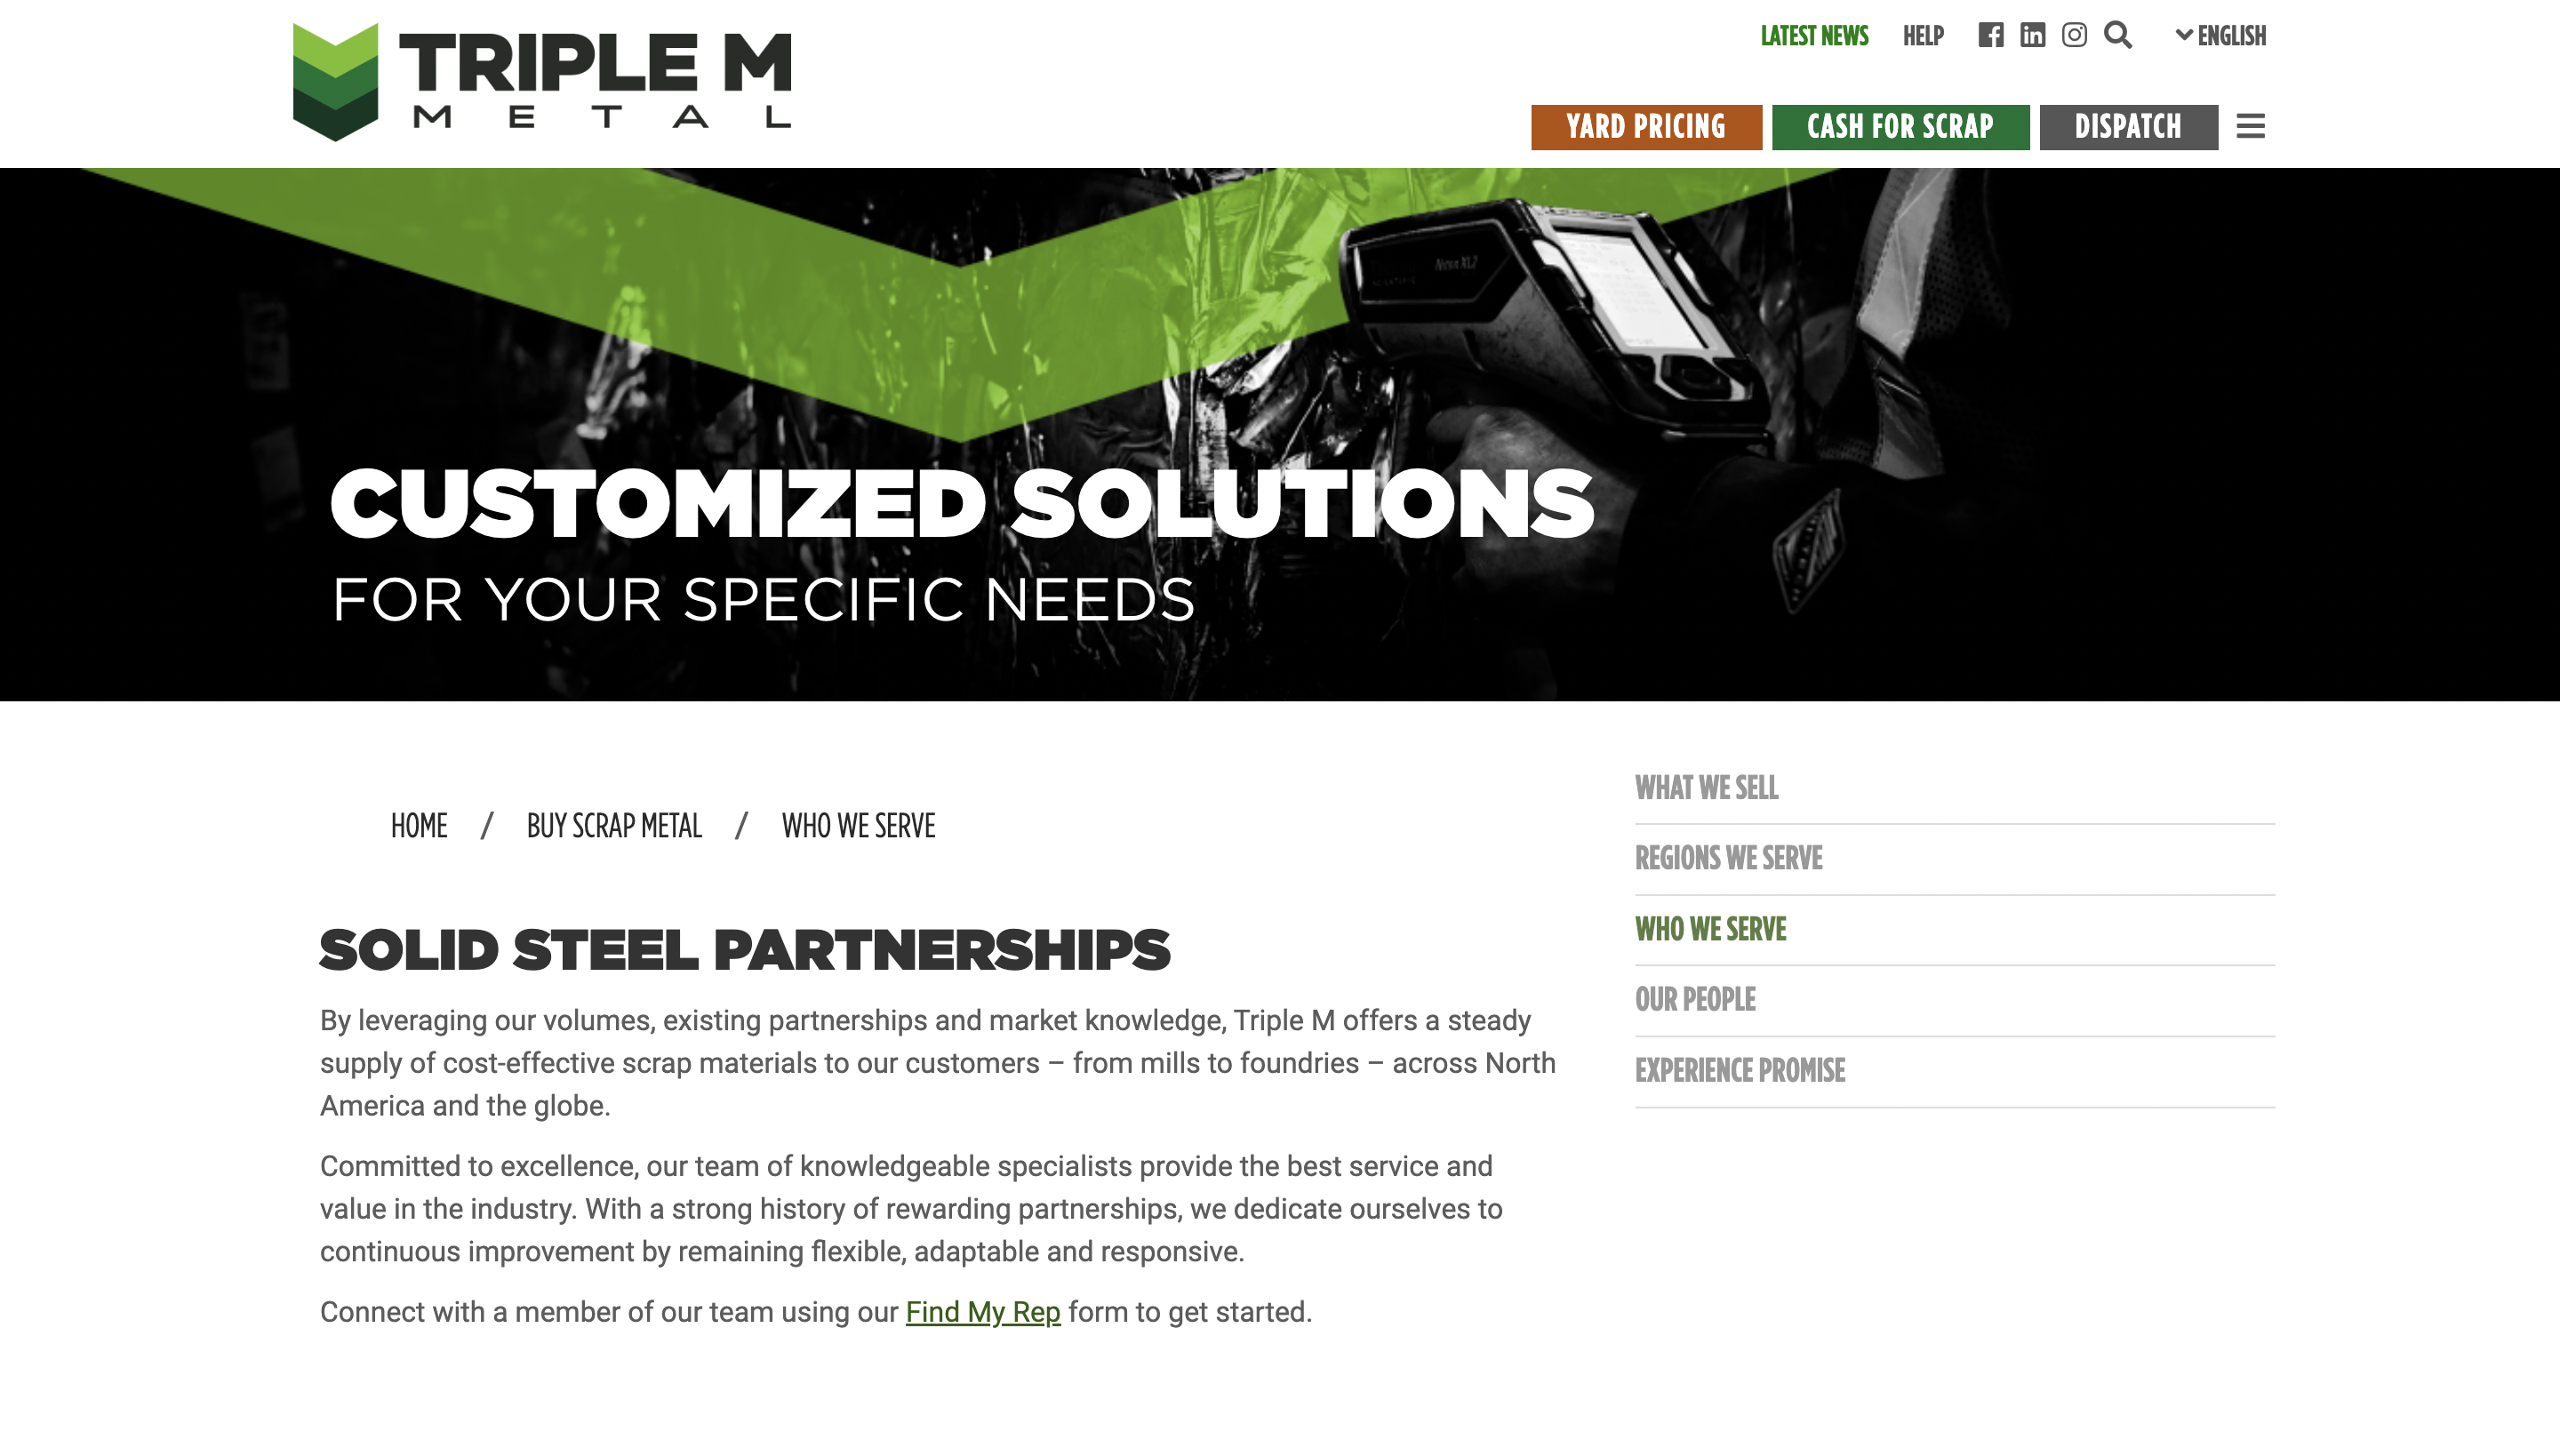 Website banner of industrial worker for manufacturing company